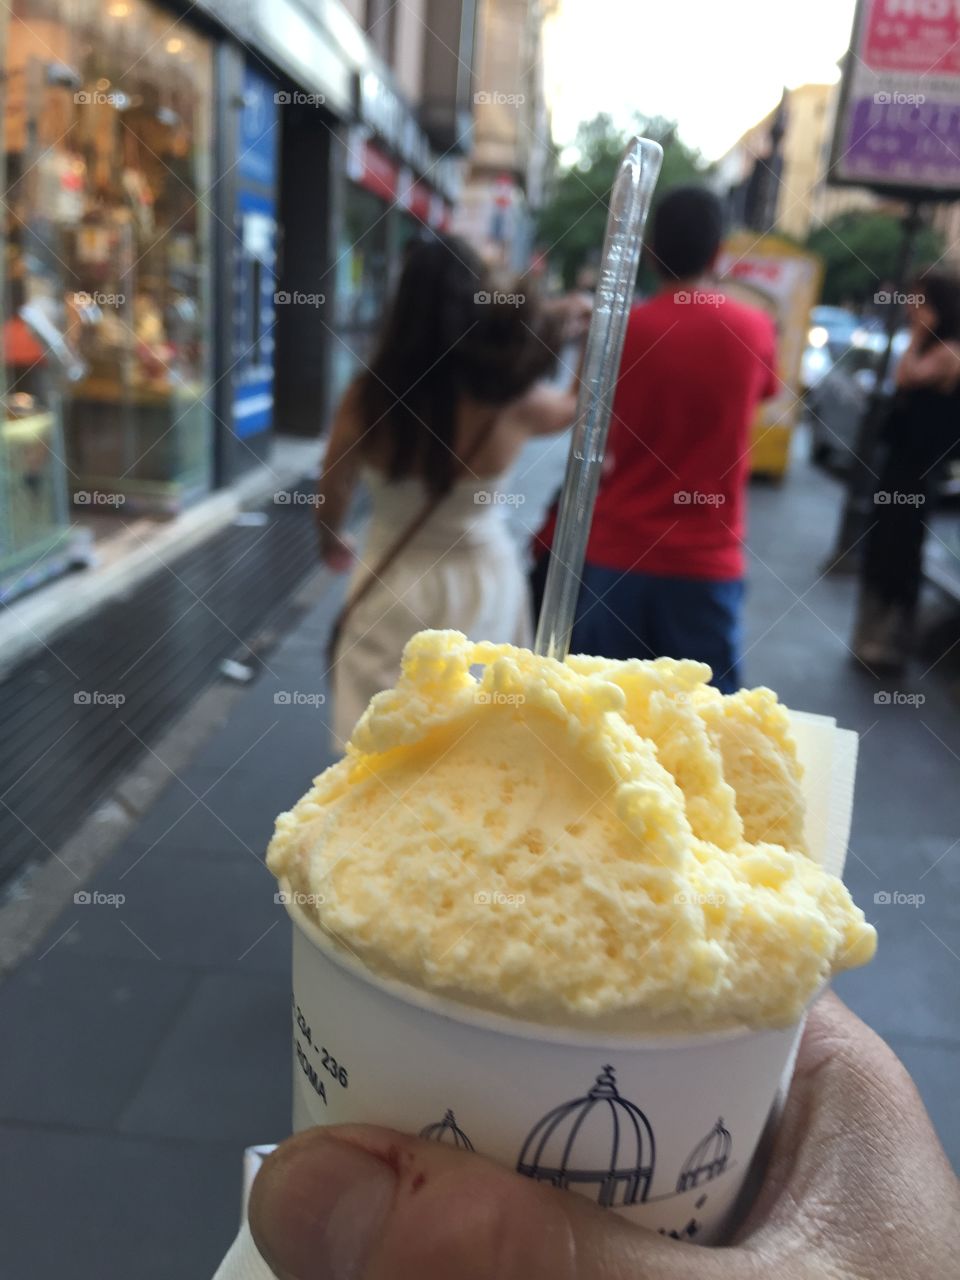 Italian Cream. It was a hot and sultry afternoon in Rome and I decided, dinner had to be cold and sweet.